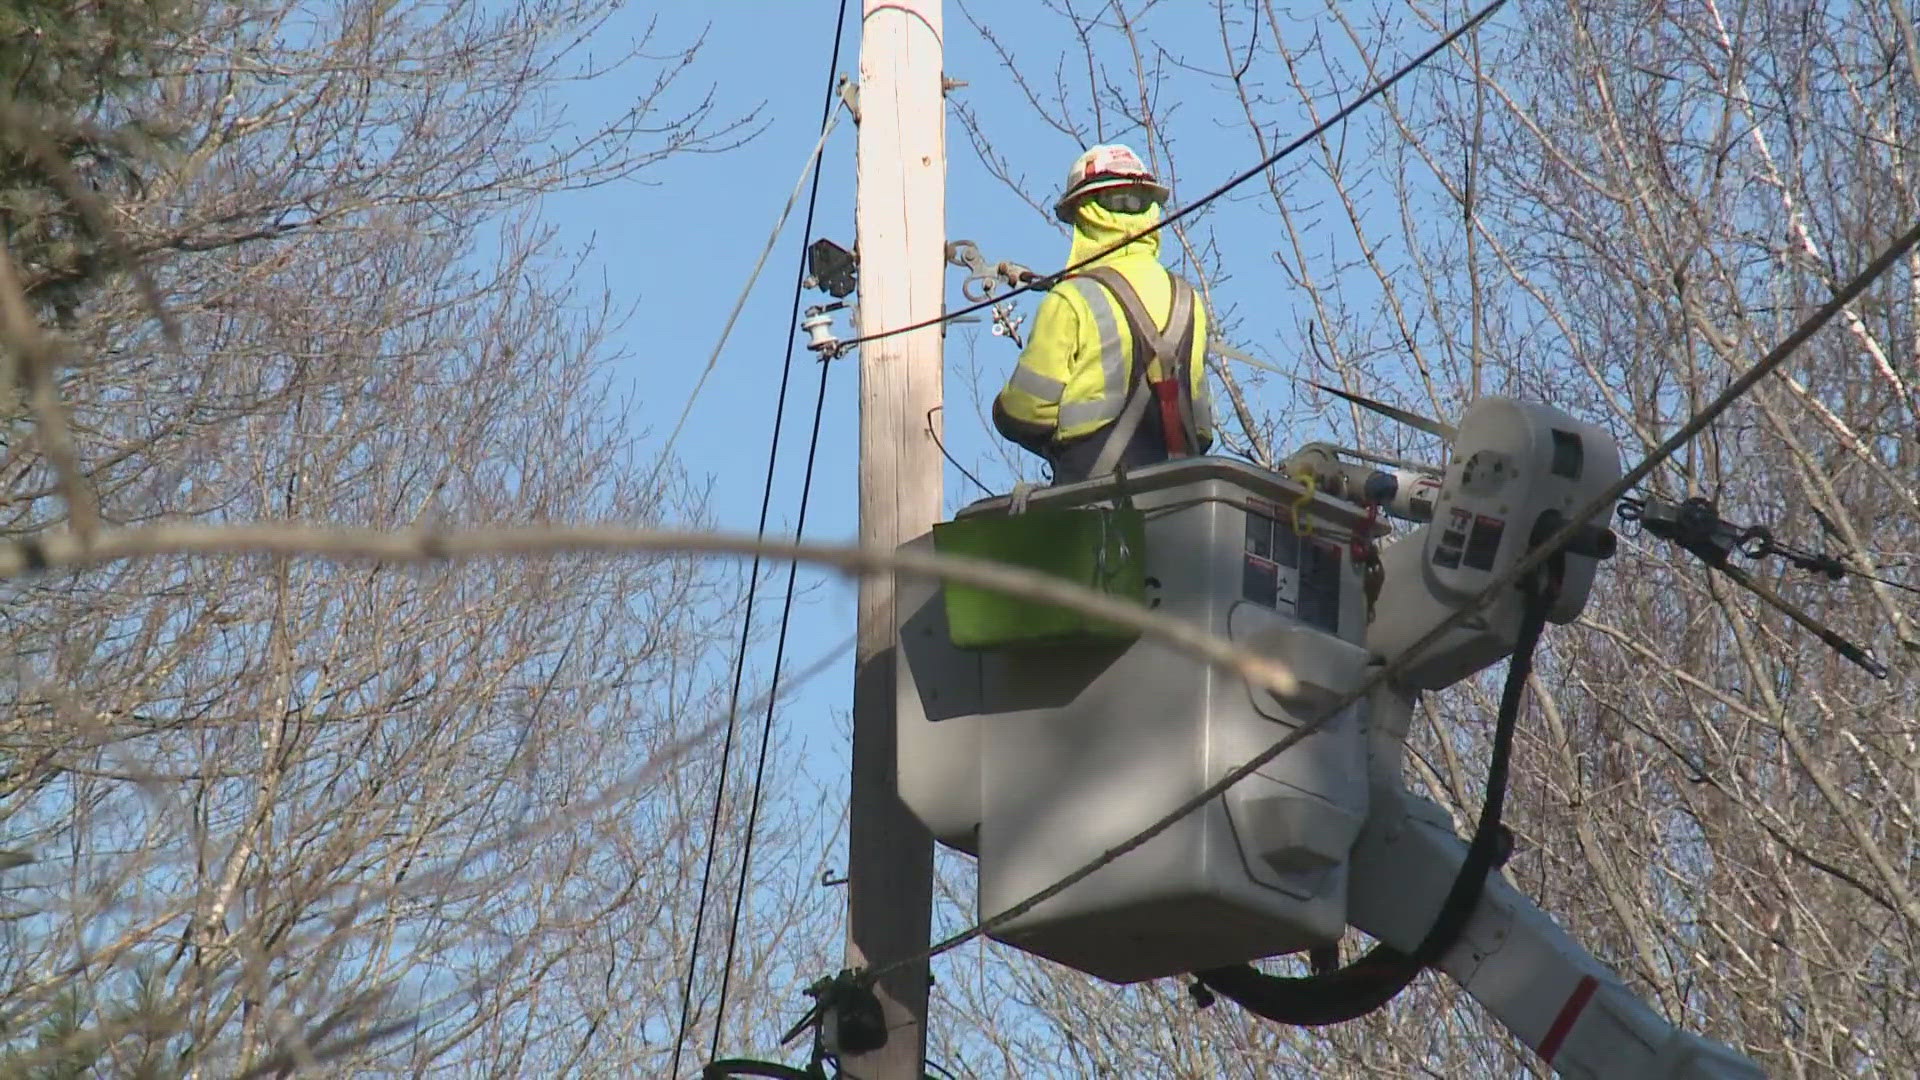 Power crews say they had been preparing for Thursday's outages before the storms hit, and are keeping a close eye on outages and downed trees.